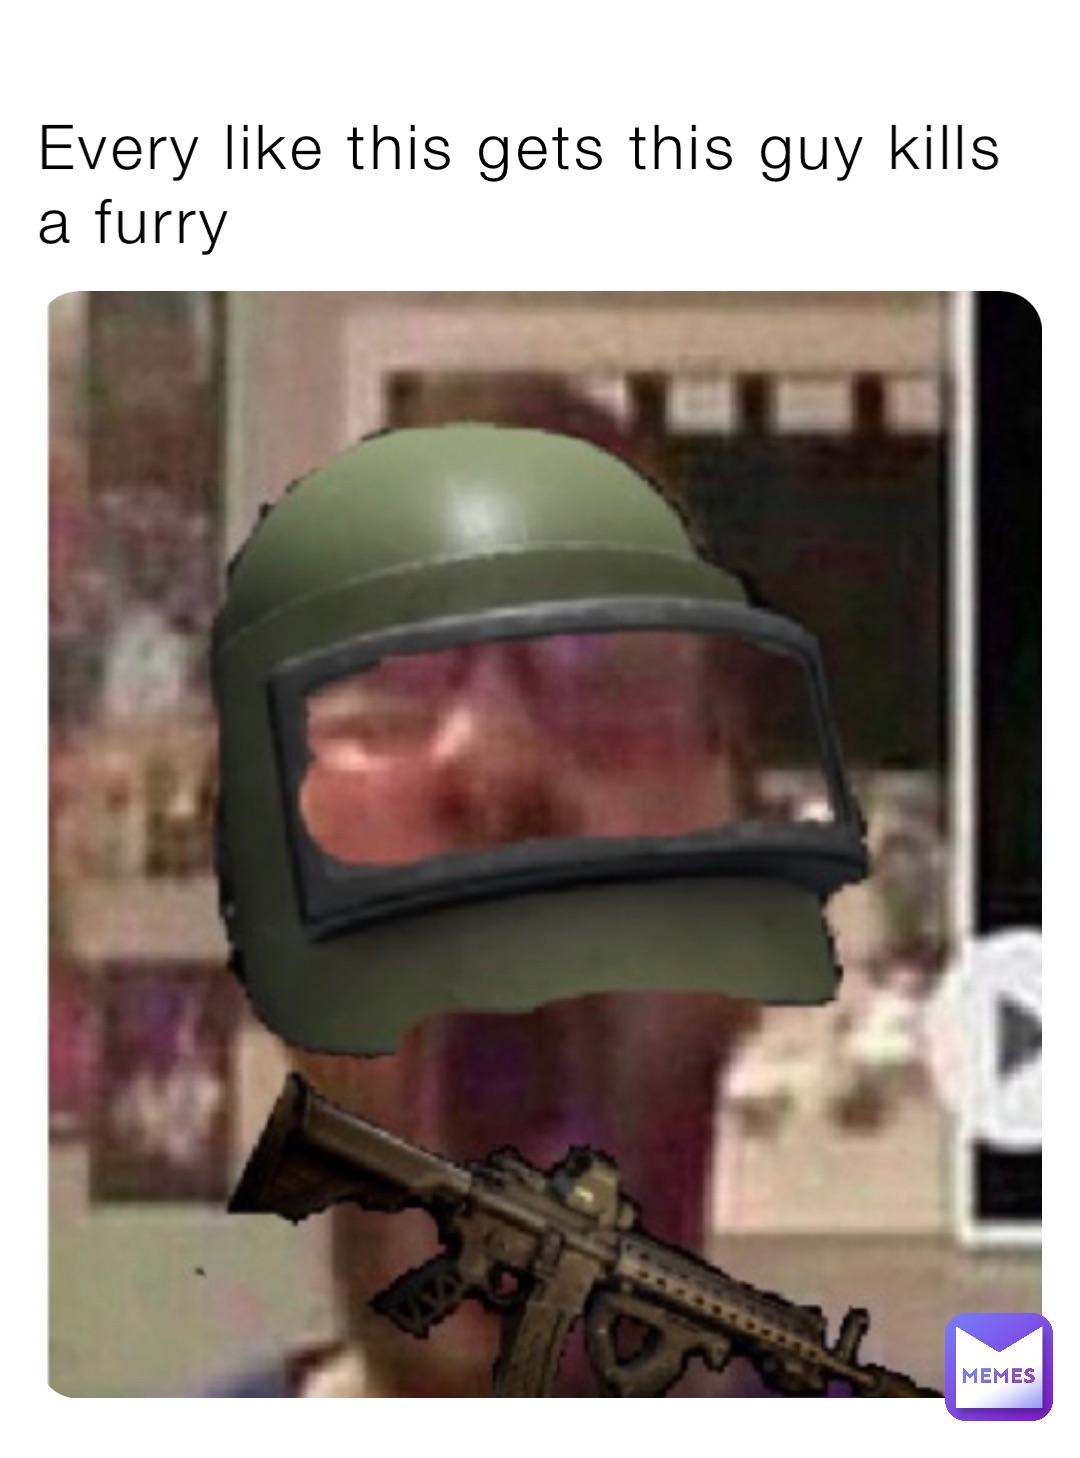 Every like this gets this guy kills a furry